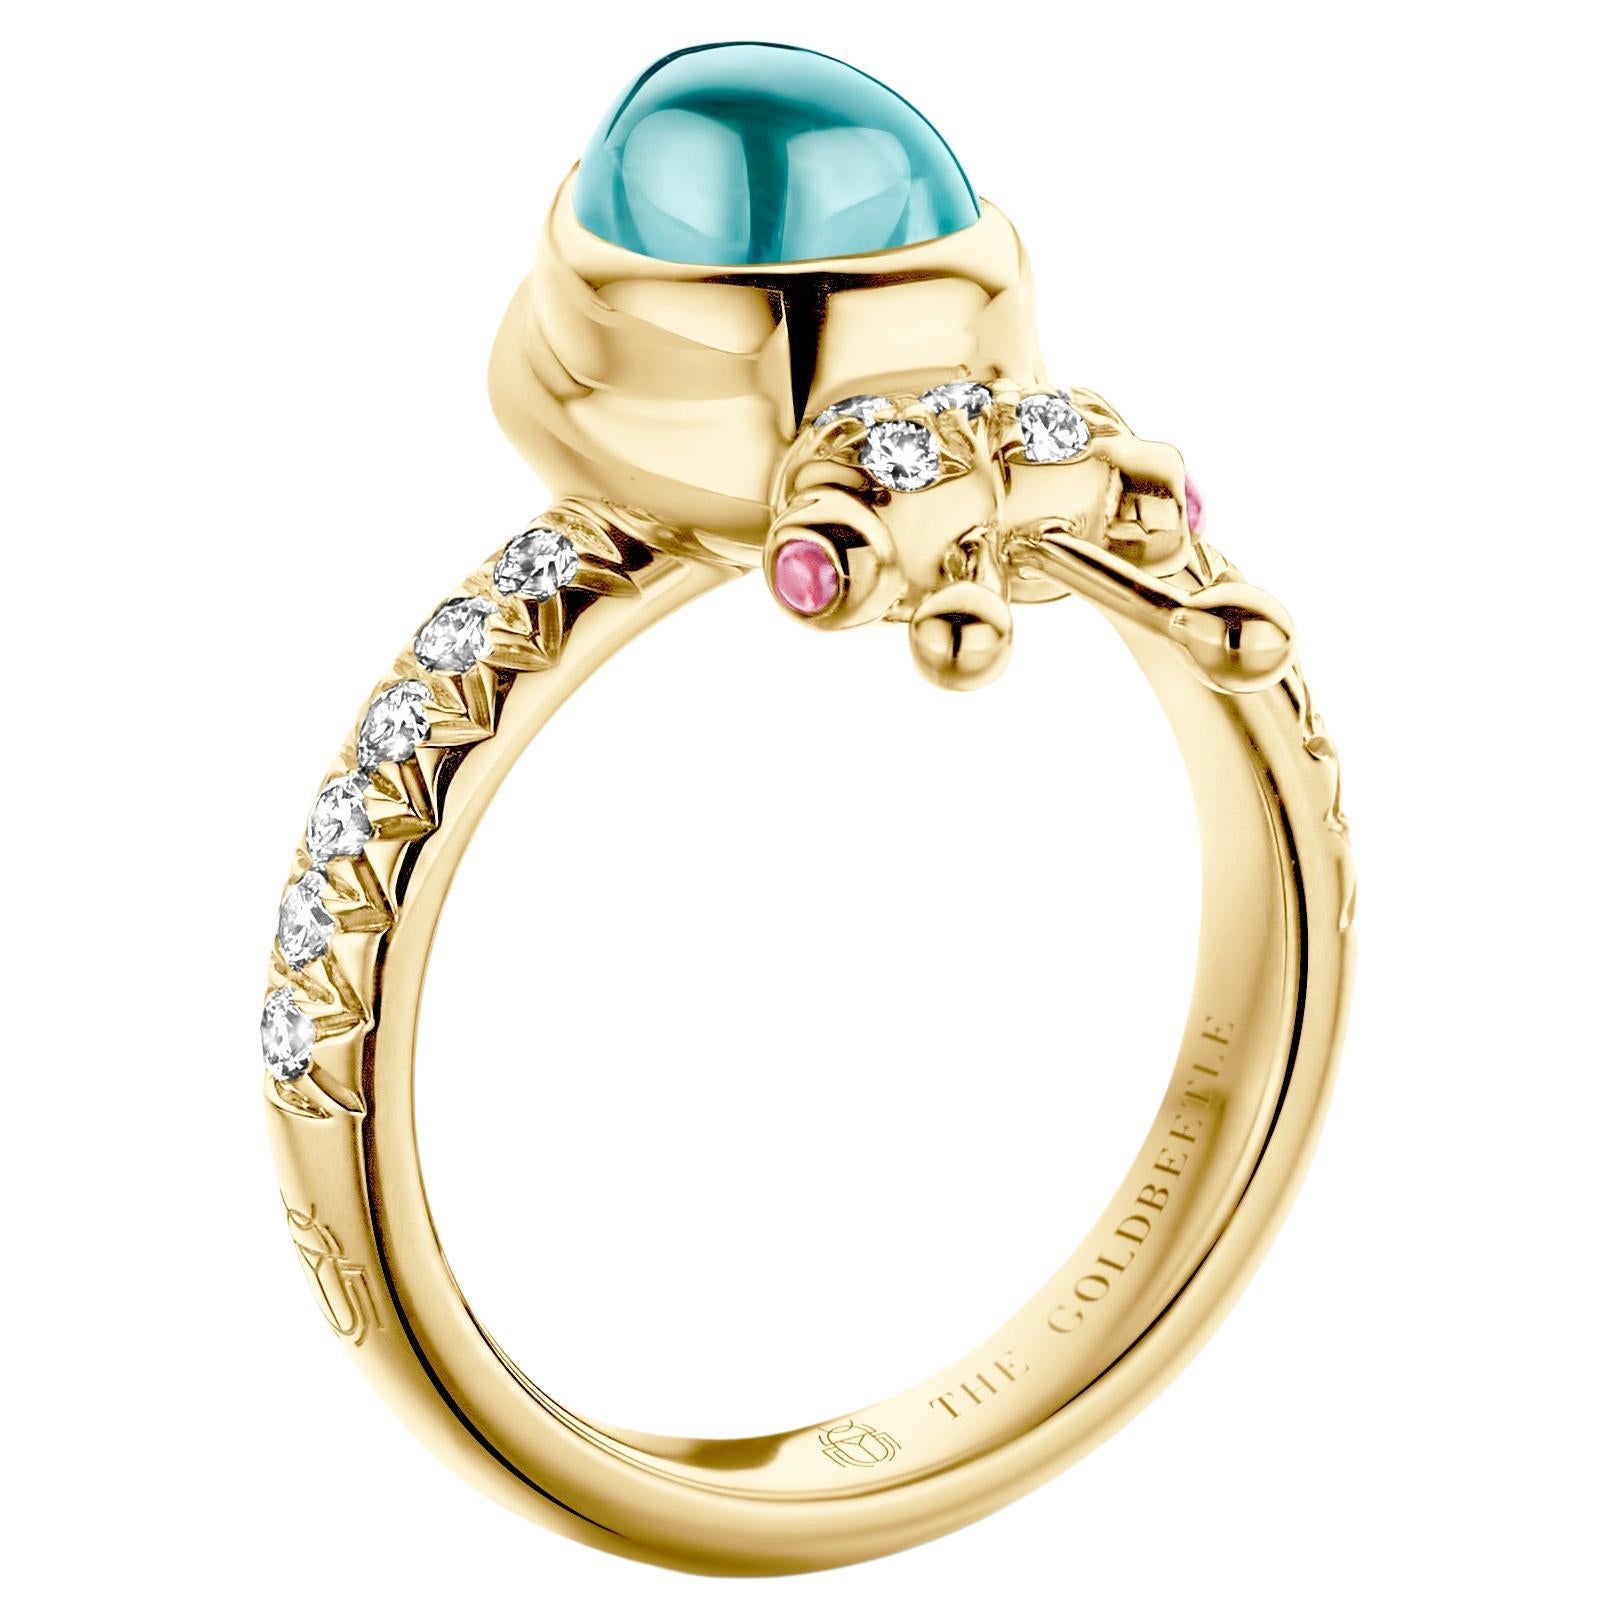 One-of-a-kind lucky beetle ring in 18-Karat yellow gold 8,6 g set with the finest diamonds in brilliant cut 0,34 Carat (VVS/DEF quality) one natural, aquamarine in pear cabochon cut and two pink tourmalines in round cabochon cut.

Celine Roelens, a